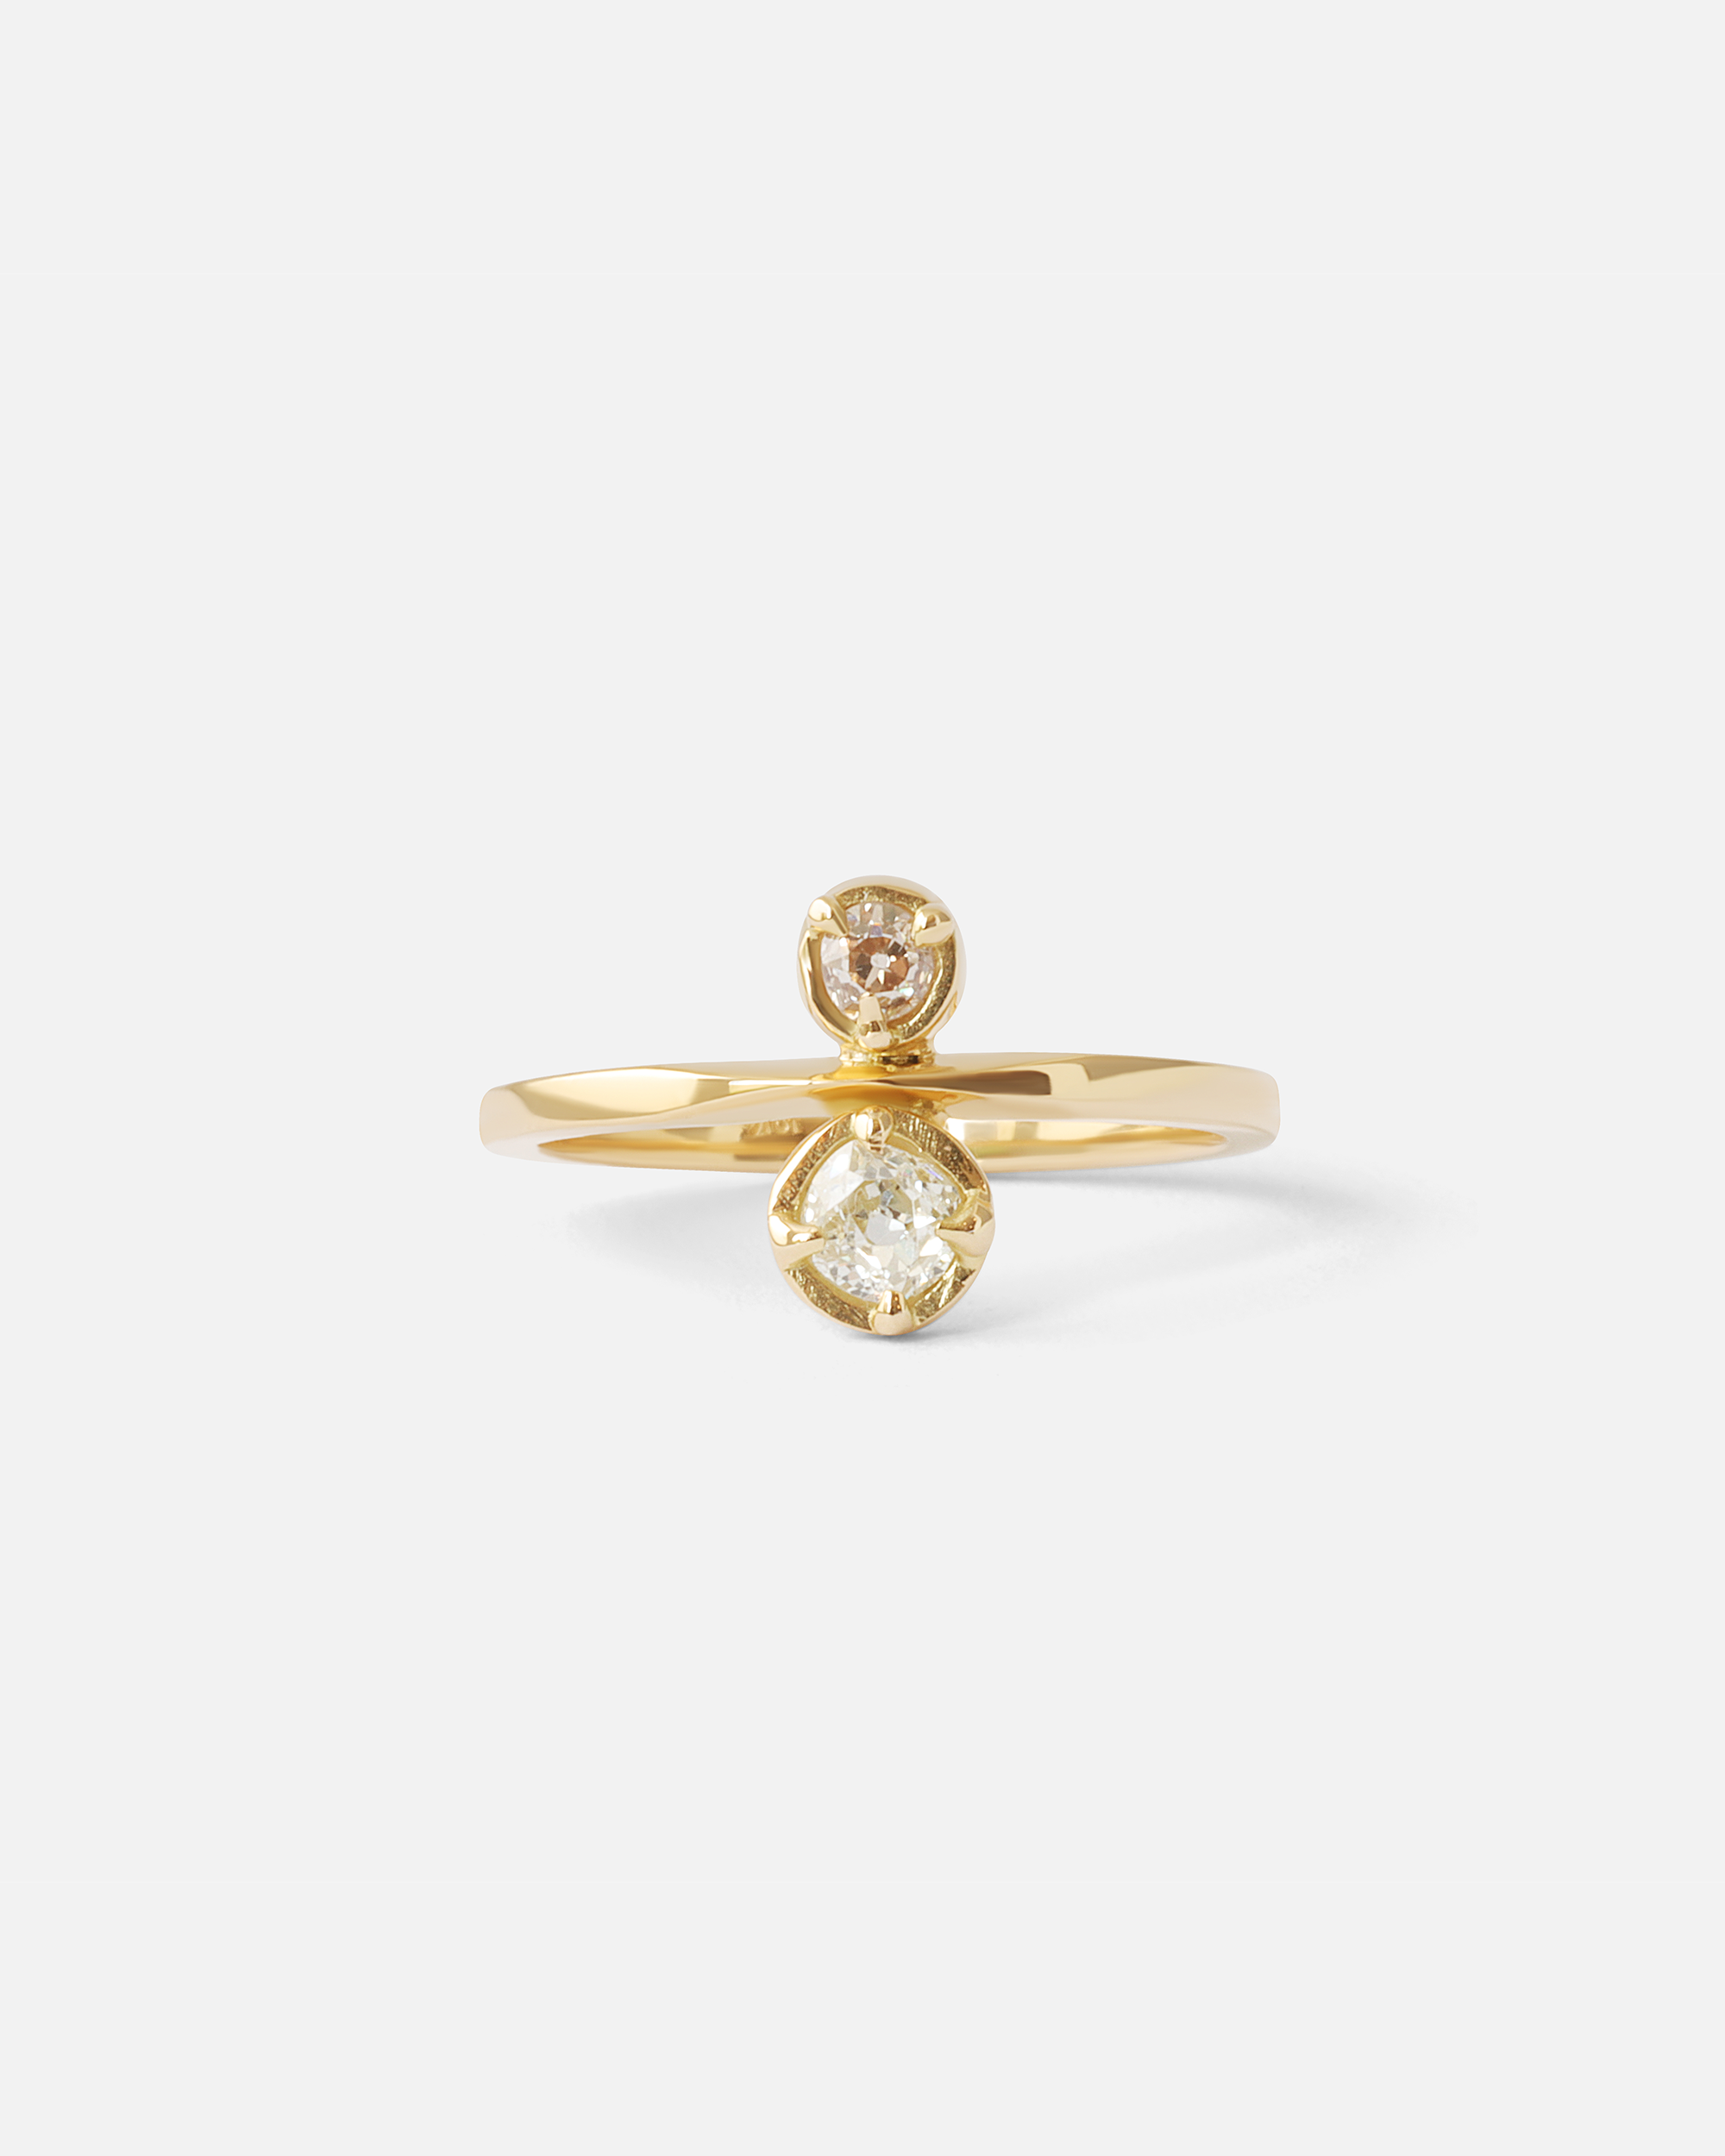 Toi Et Moi / Old Mine Cut Diamond Ring By fitzgerald jewelry